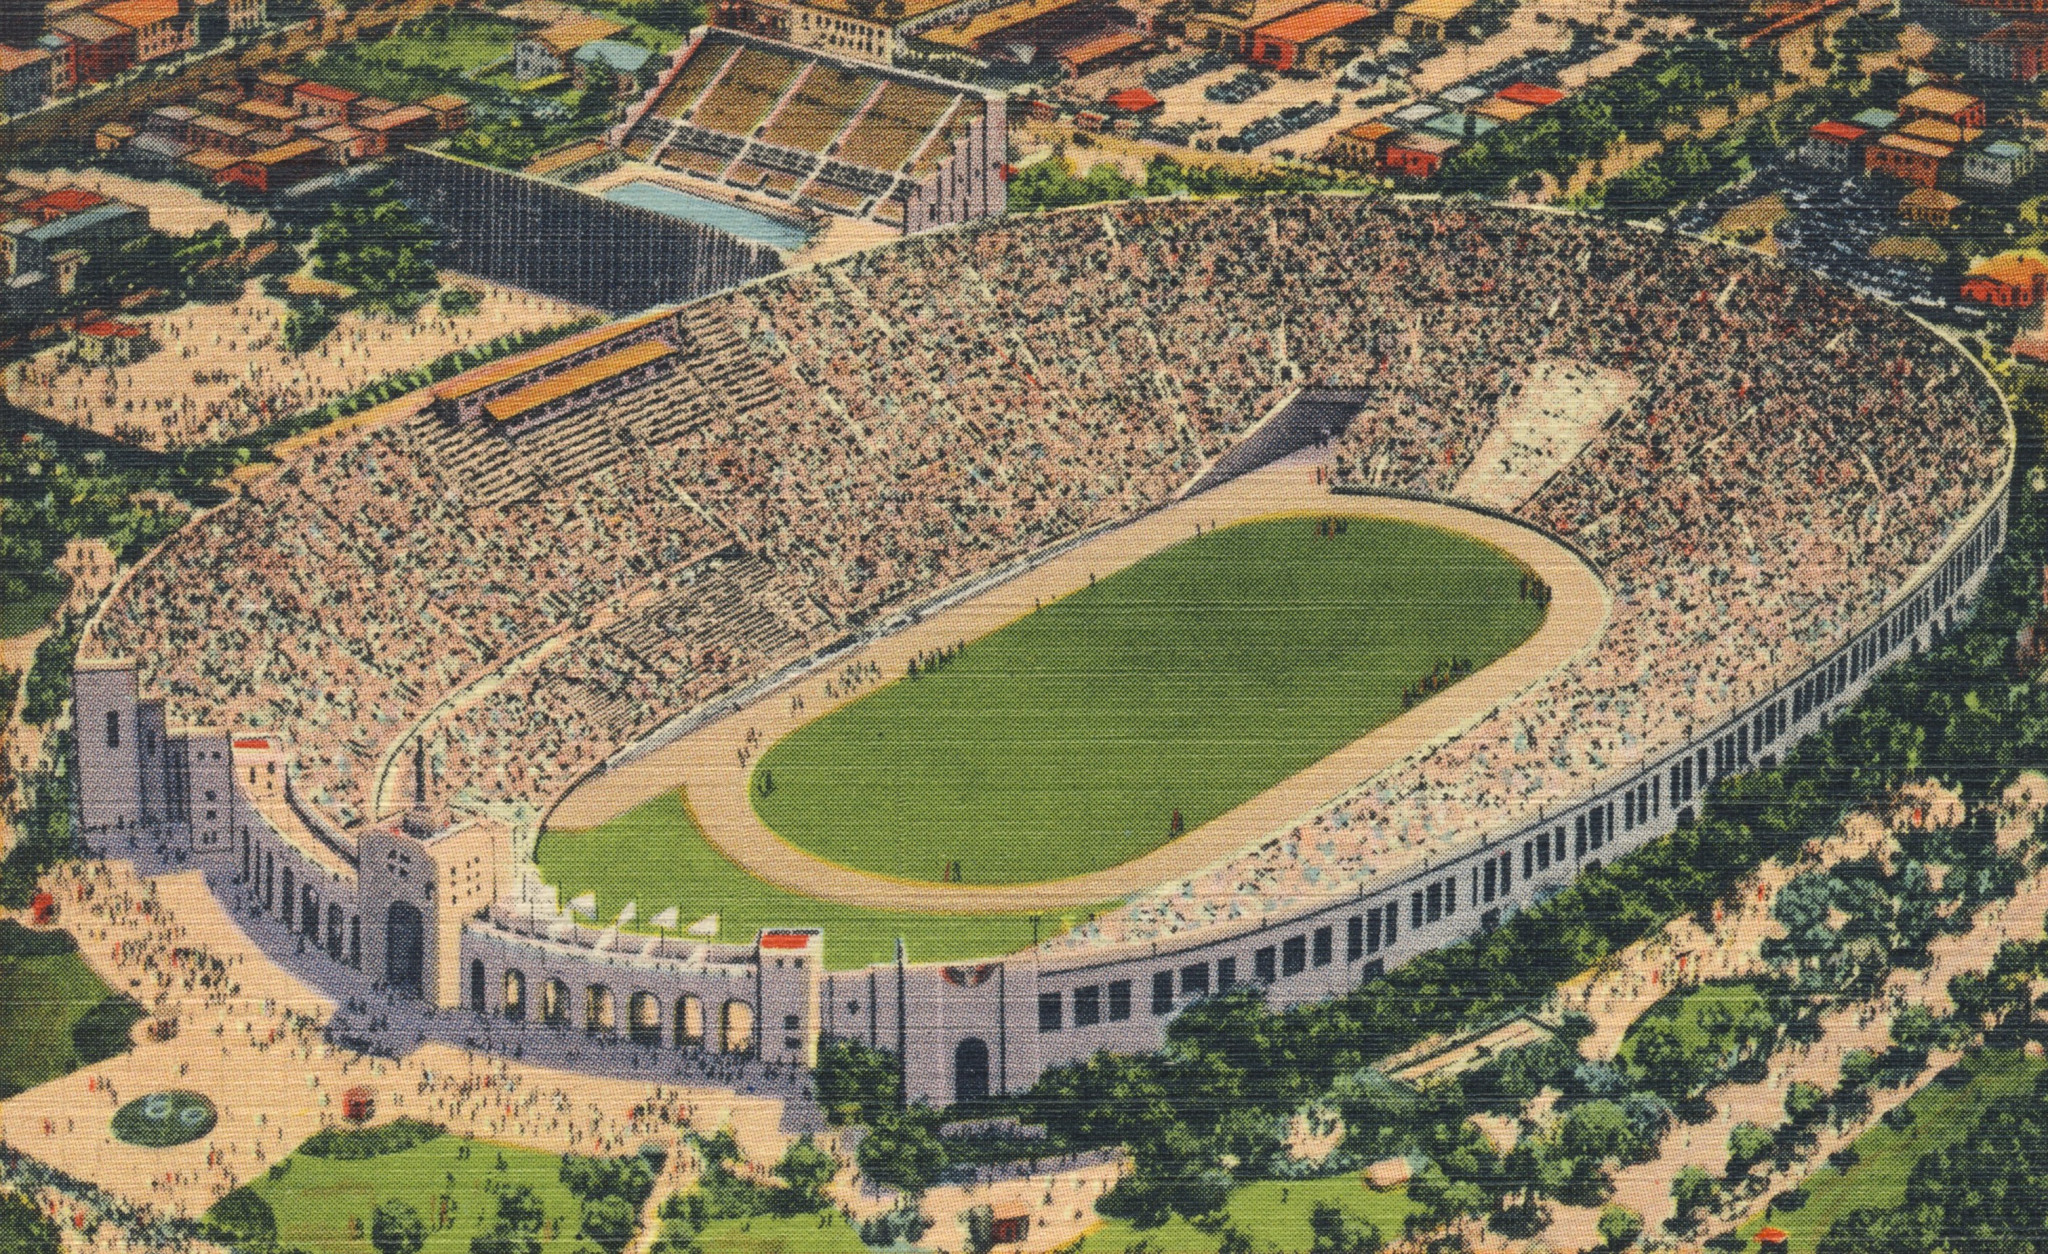 The Los Angeles Coliseum hosted the 1932 and 1984 Olympics but is most regularly used for college football ITG